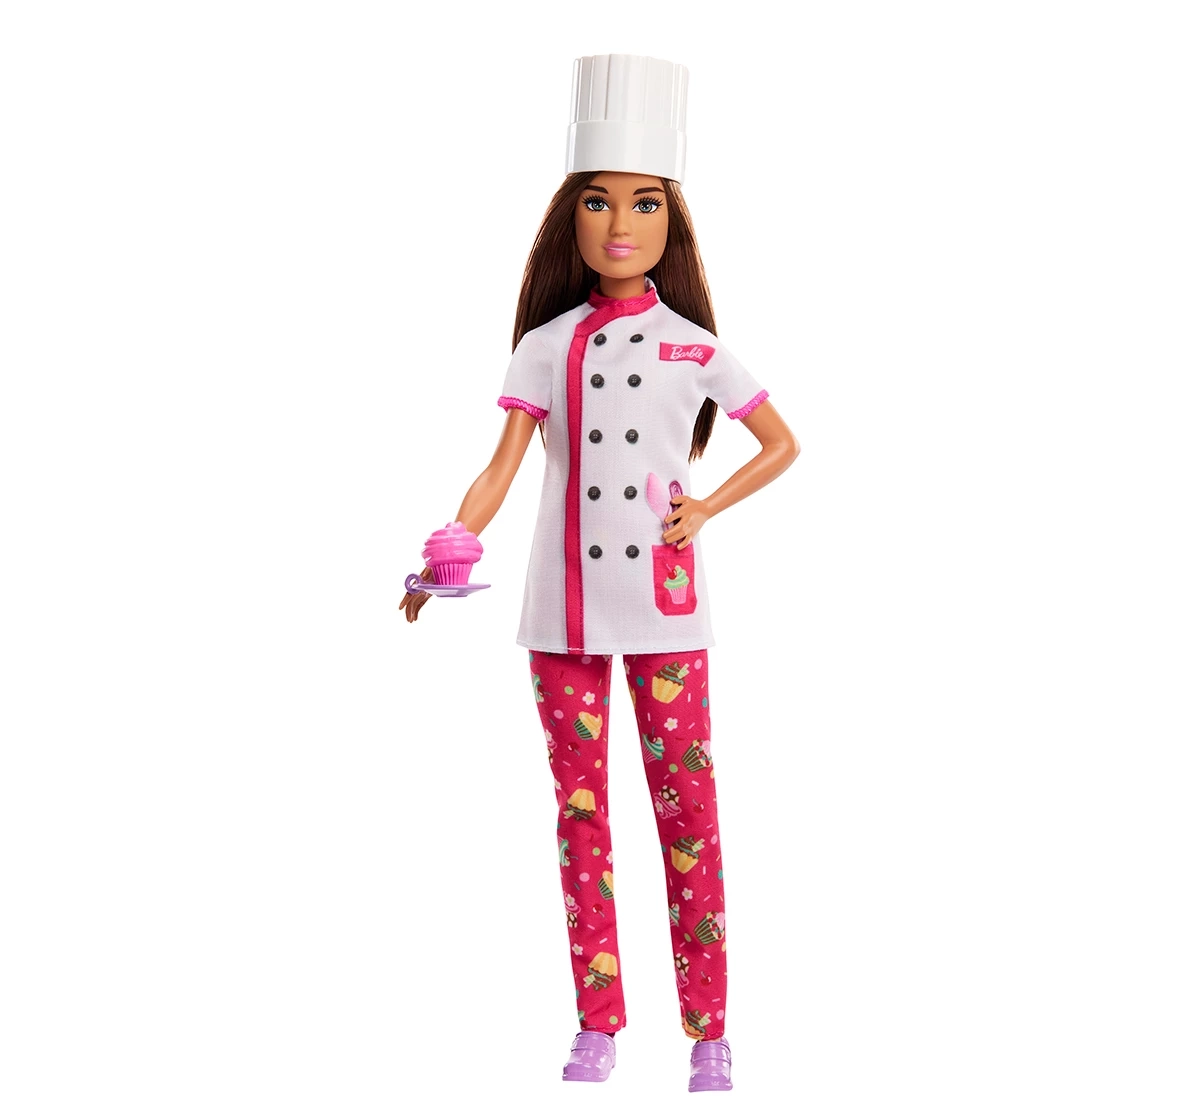 Barbie Doll & Accessories, Career Pastry Chef Doll with Hat, and Cake Slice, Kids for 3Y+, Multicolour